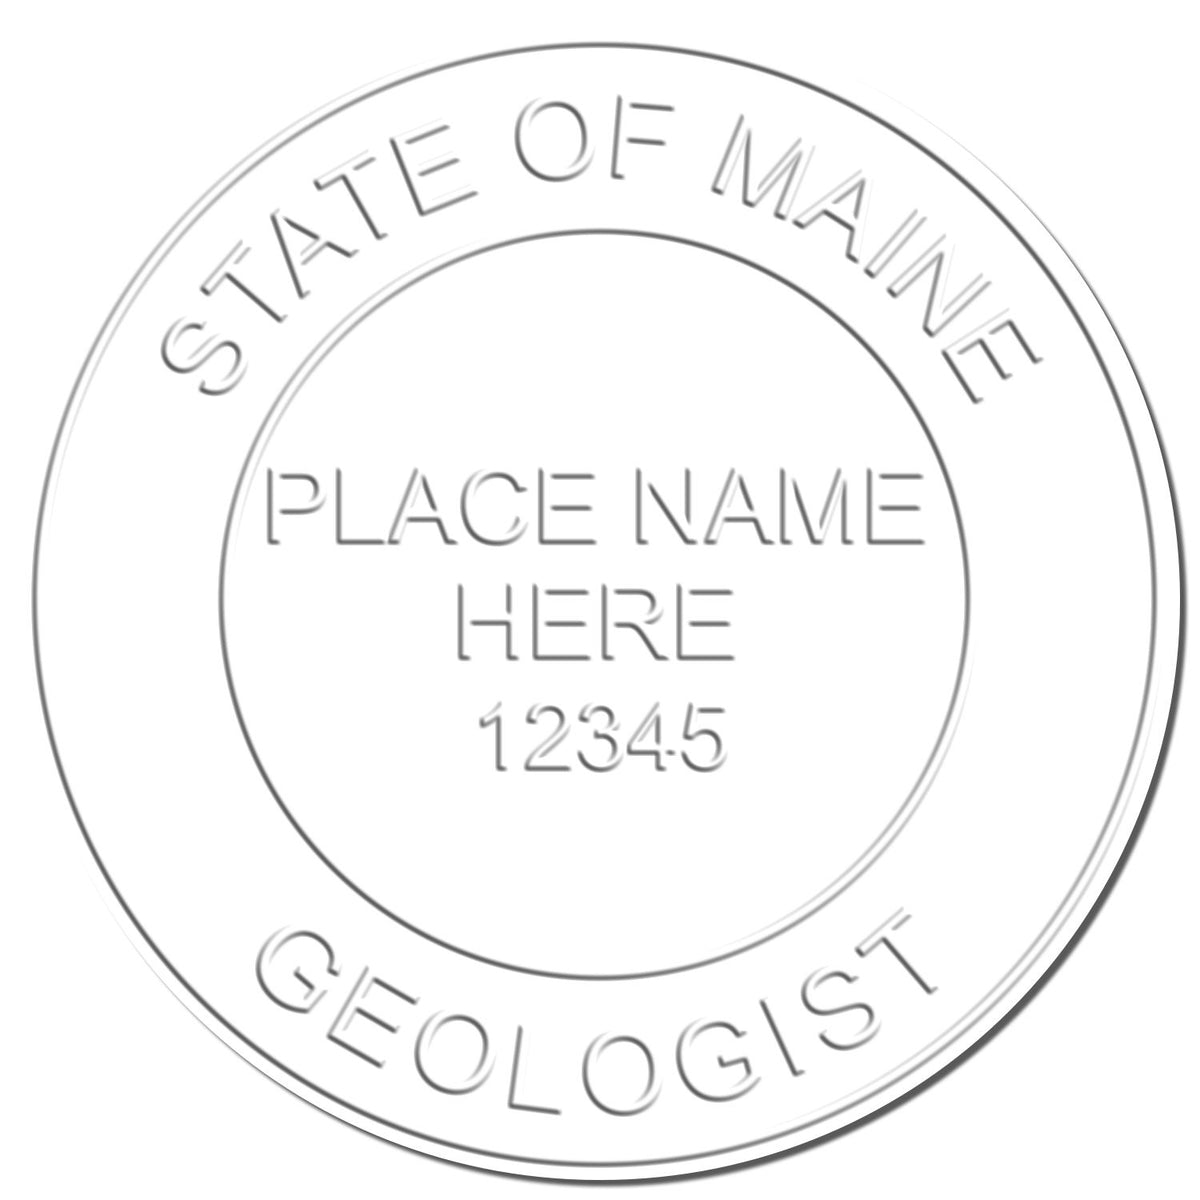 A photograph of the State of Maine Extended Long Reach Geologist Seal stamp impression reveals a vivid, professional image of the on paper.